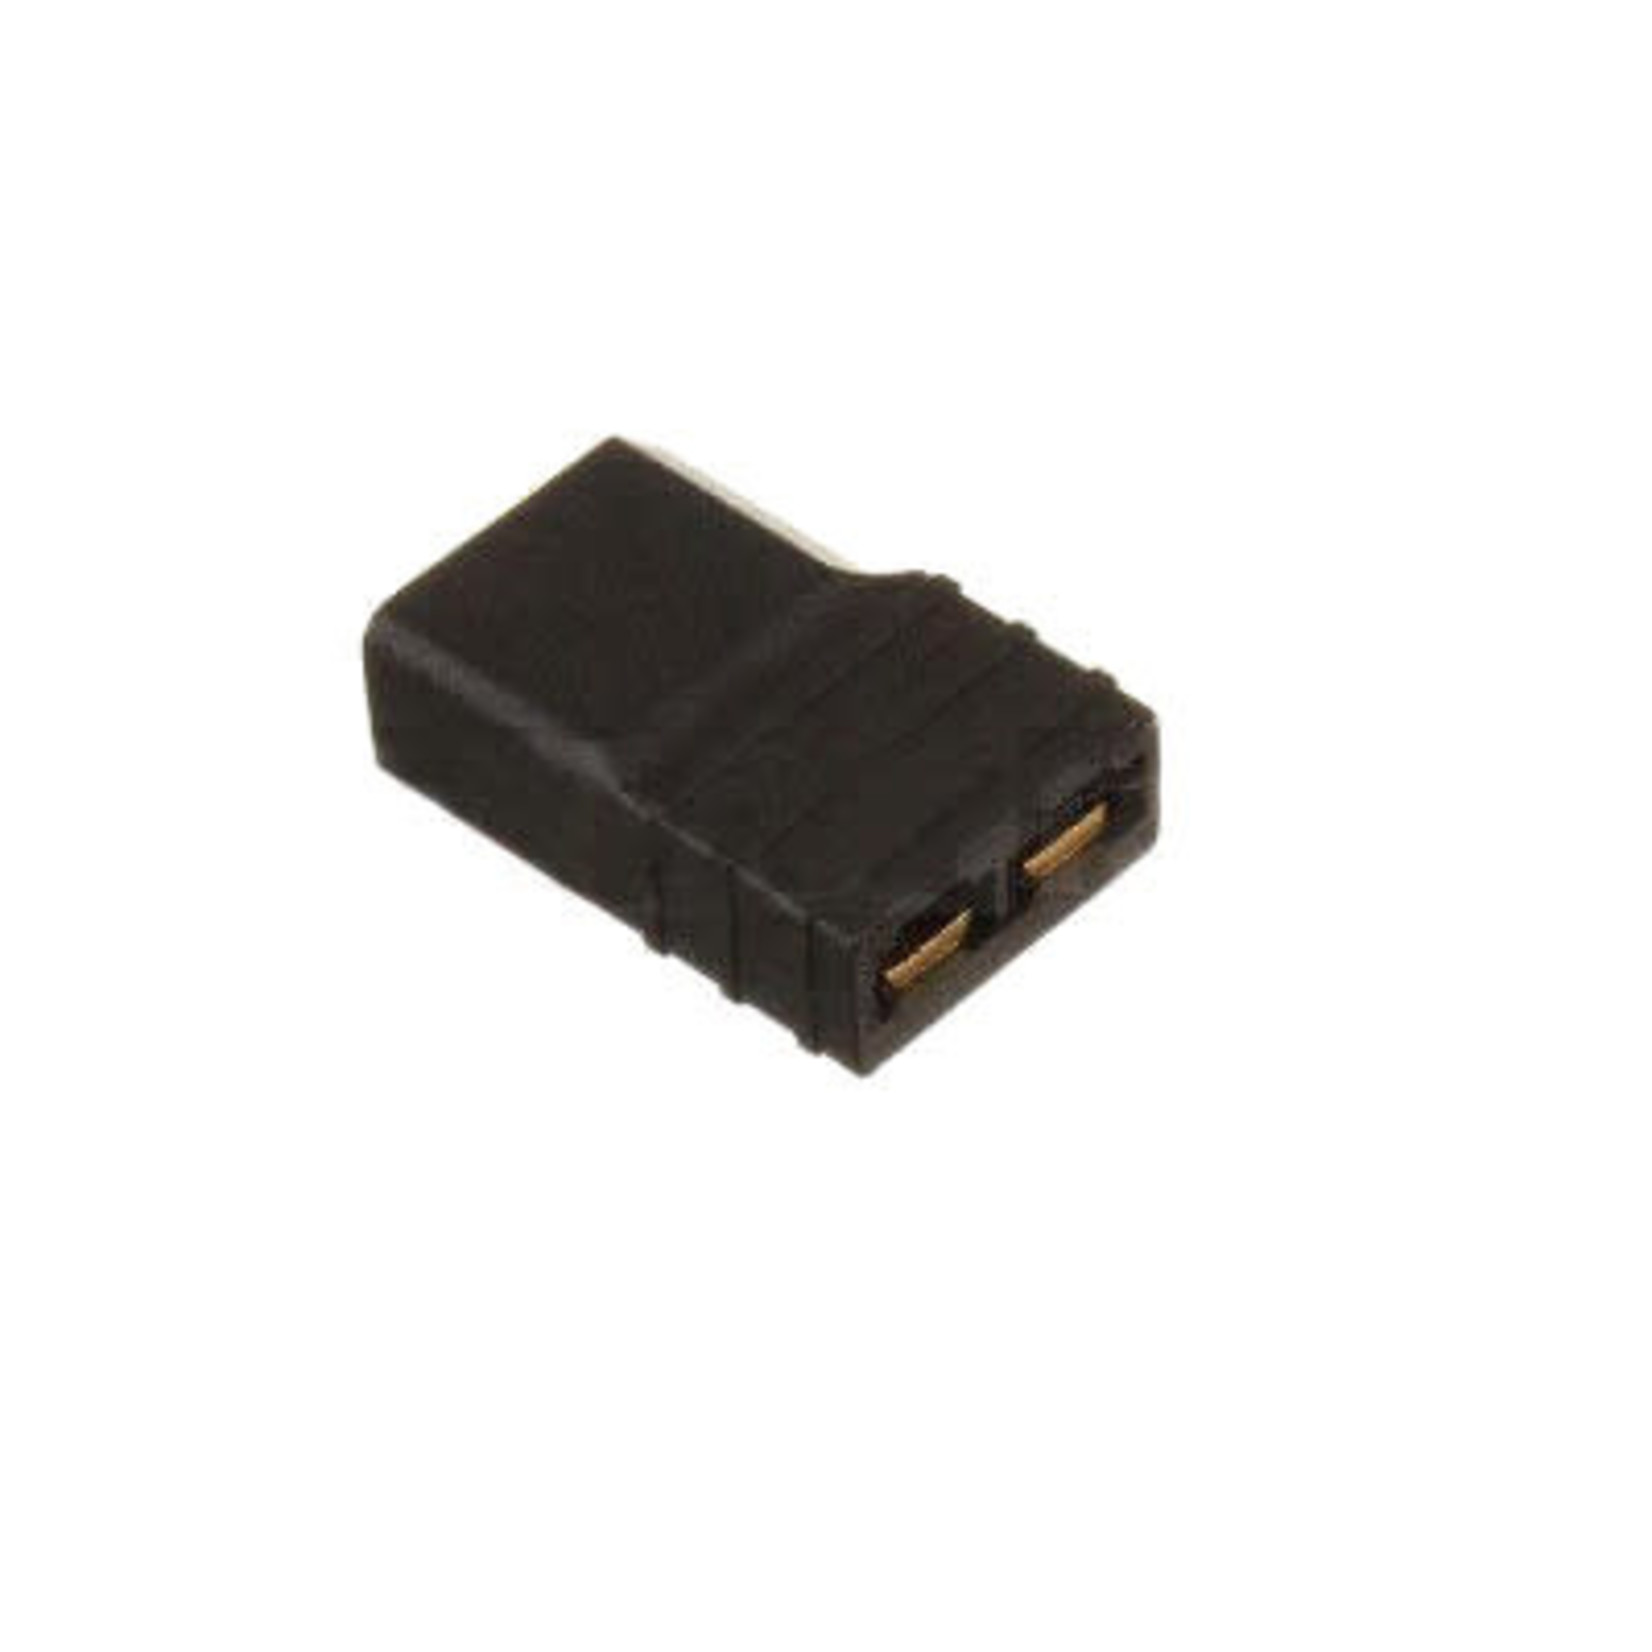 EPB Direcr Connect Adapter TRX Male to XT60 Female